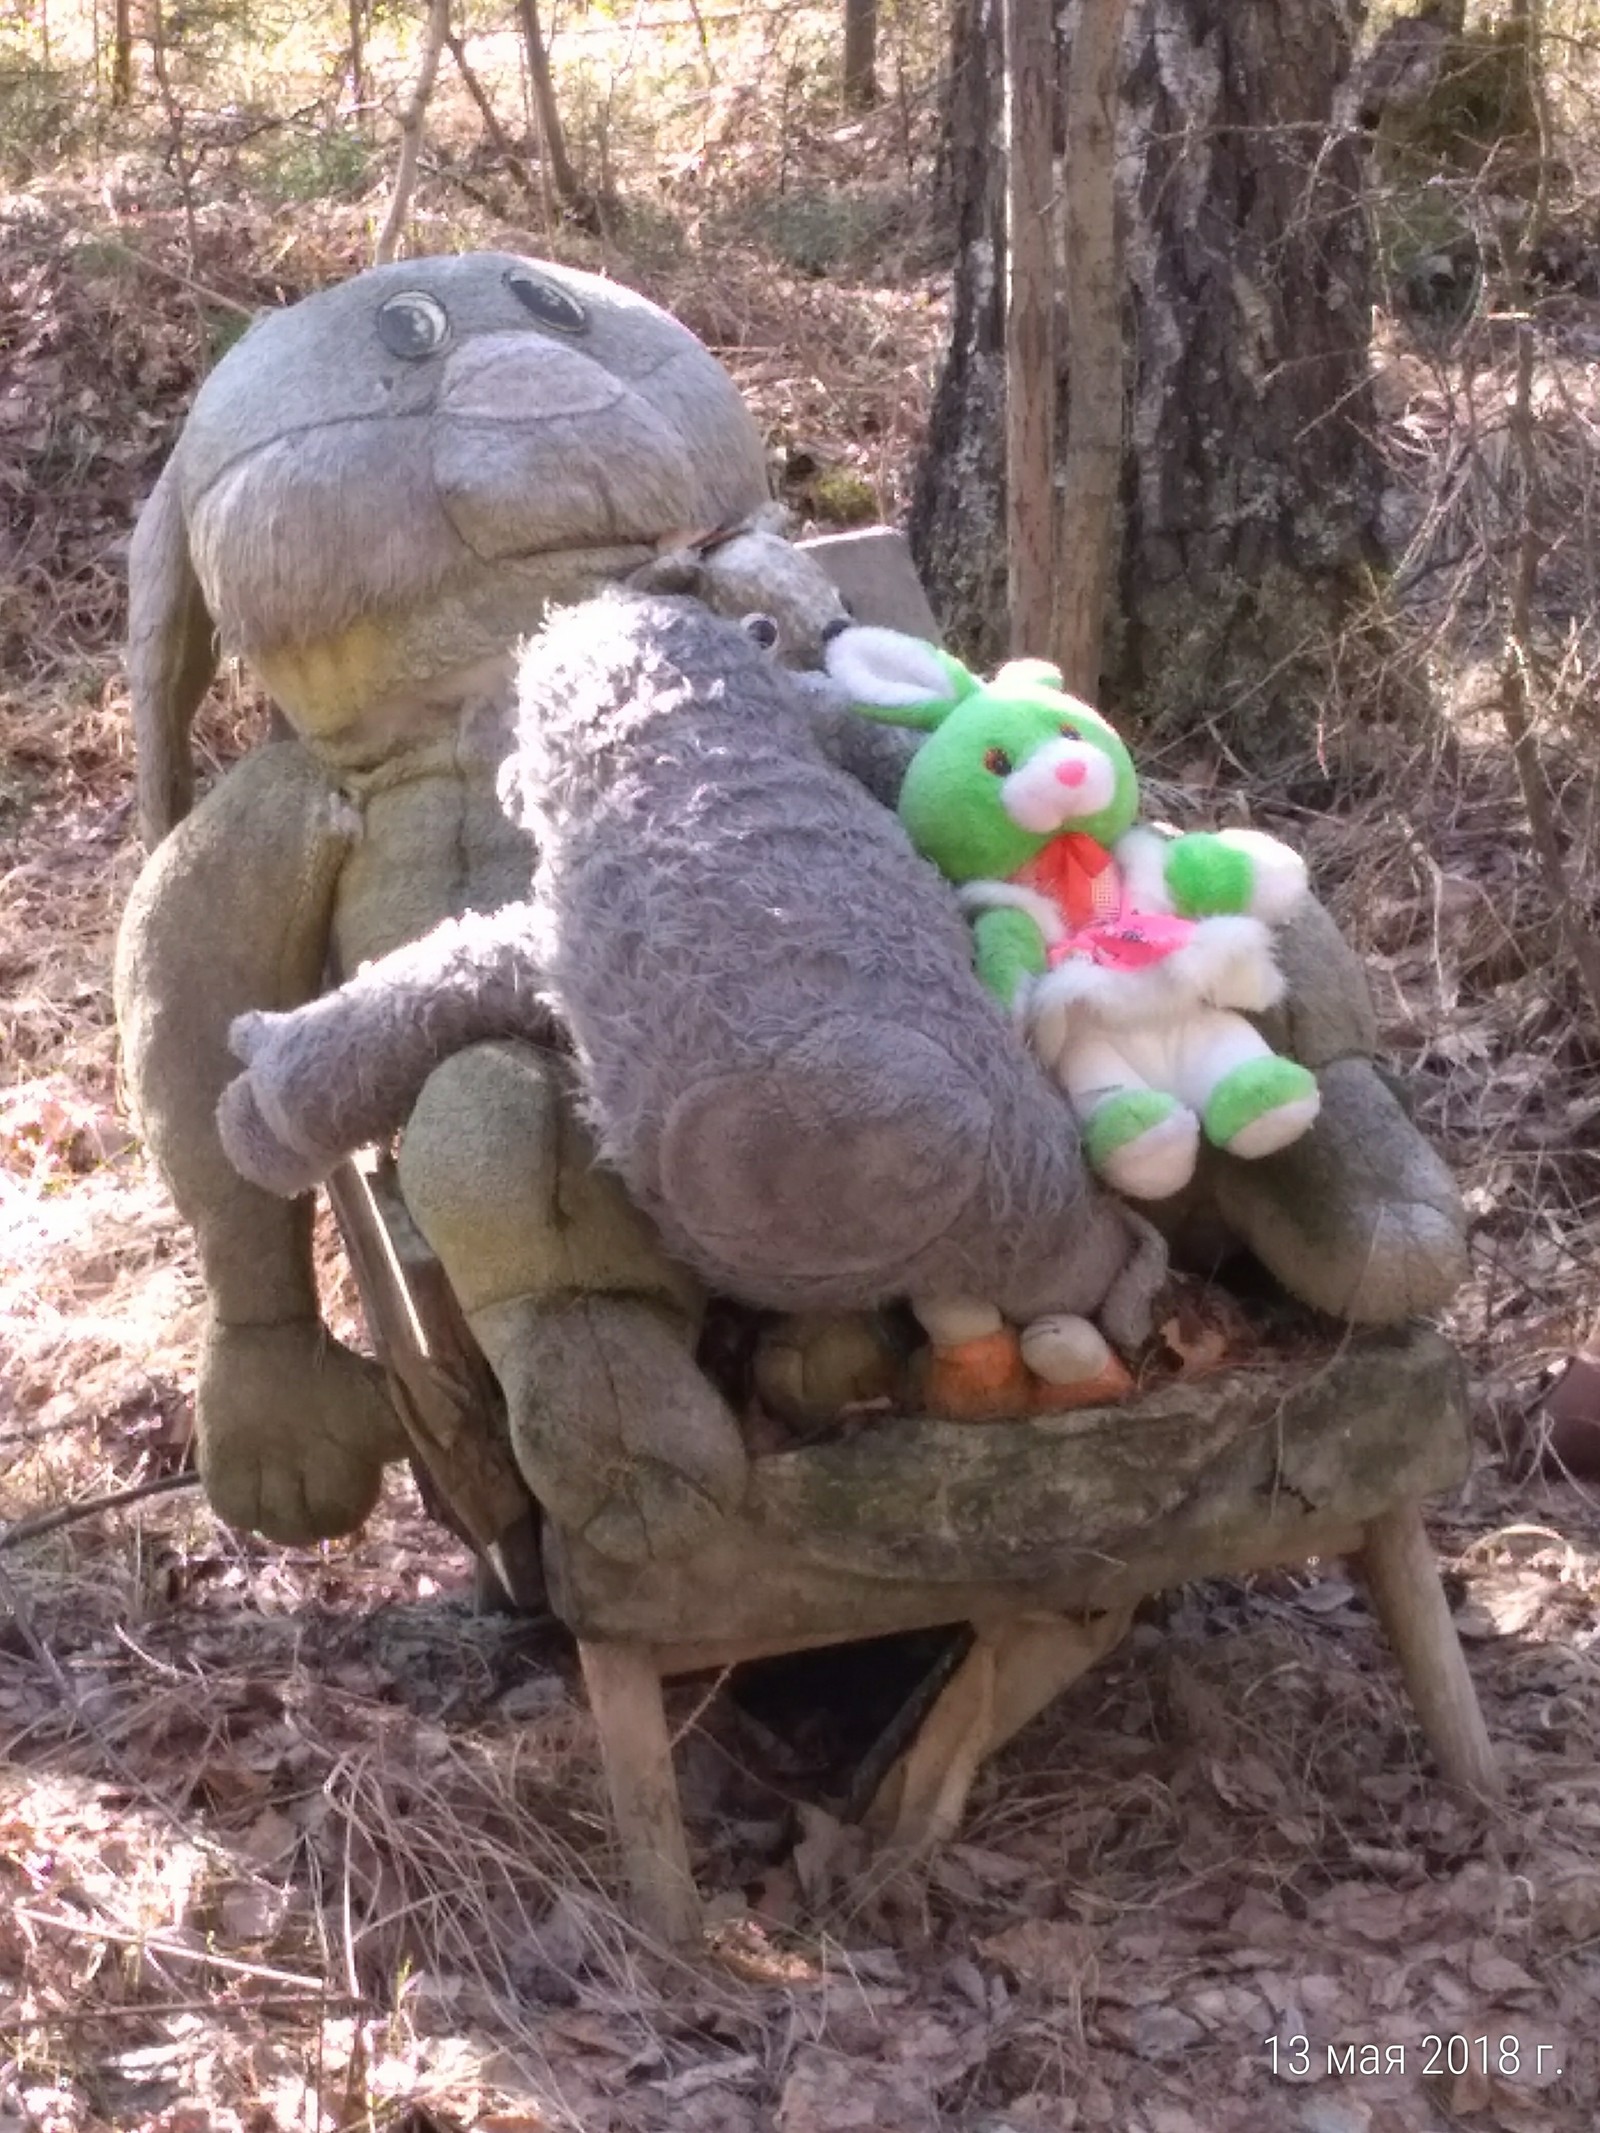 What for? - My, Forest, Oddities, Longpost, Soft toy, Toys, Kids toys, Dump, Fuck aesthetics